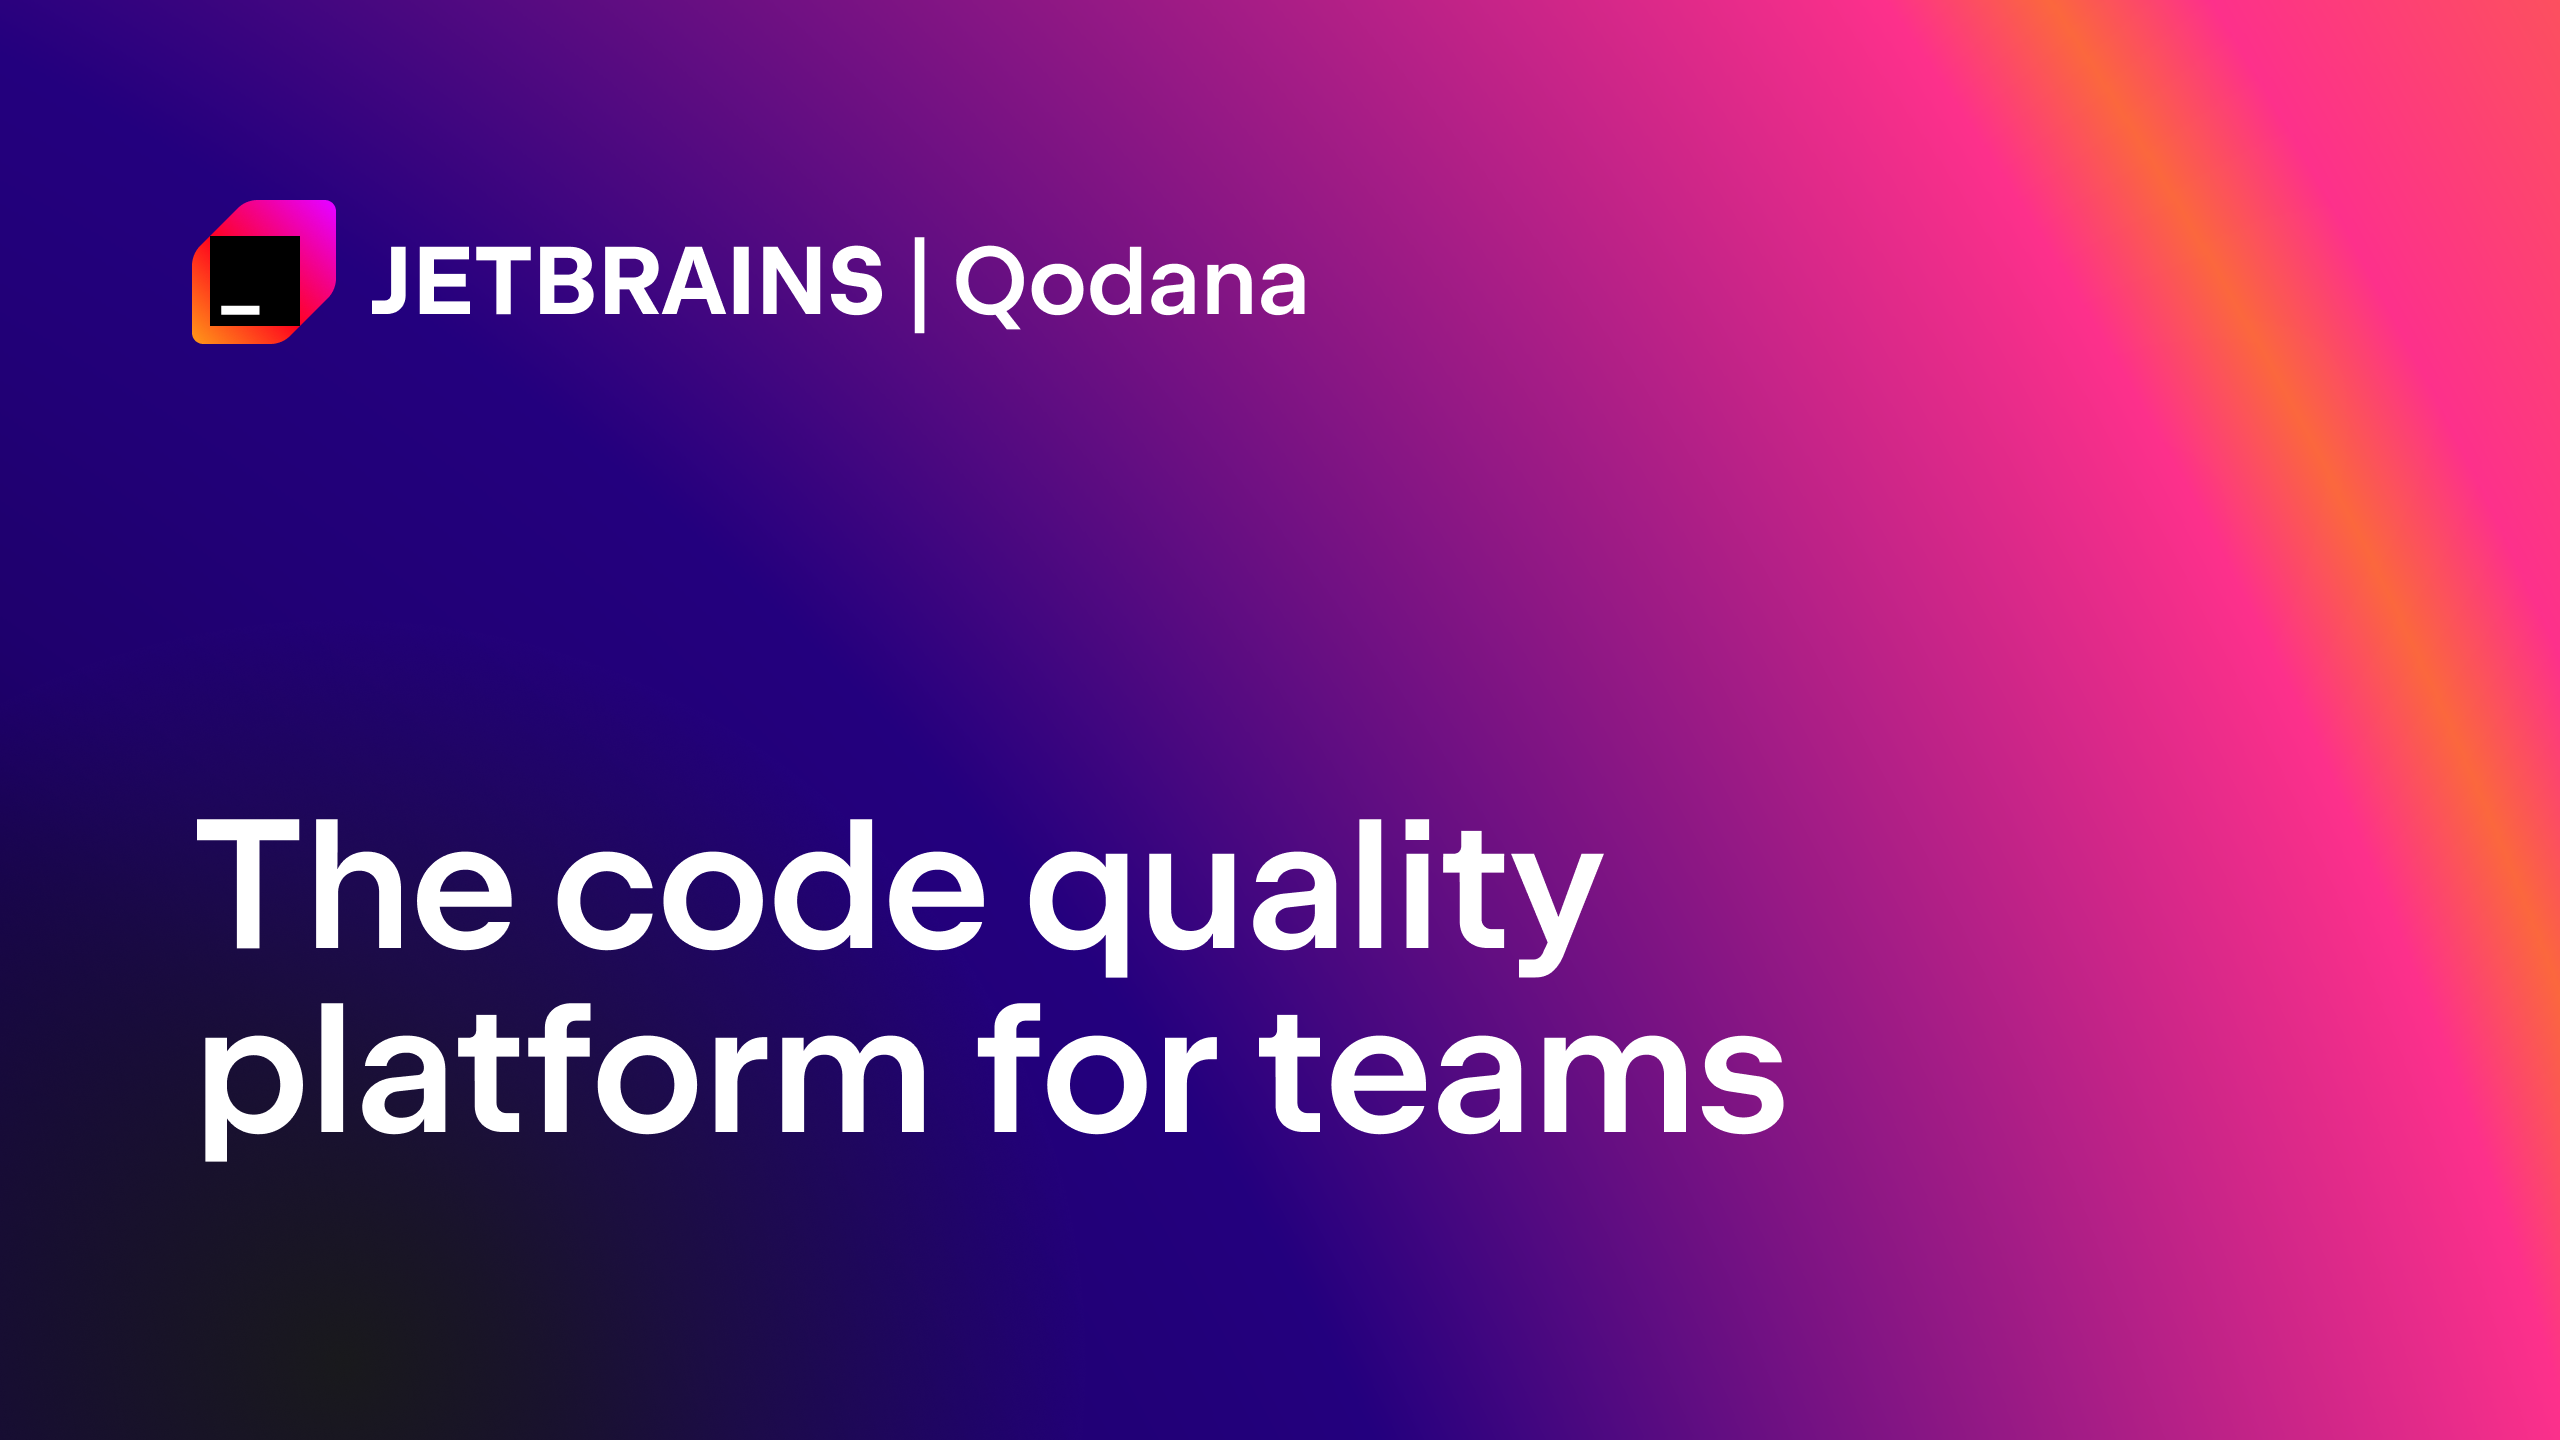 Qodana is a code quality monitoring platform that allows you to evaluate the integrity of code you own, contract, or purchase. It brings into your CI/